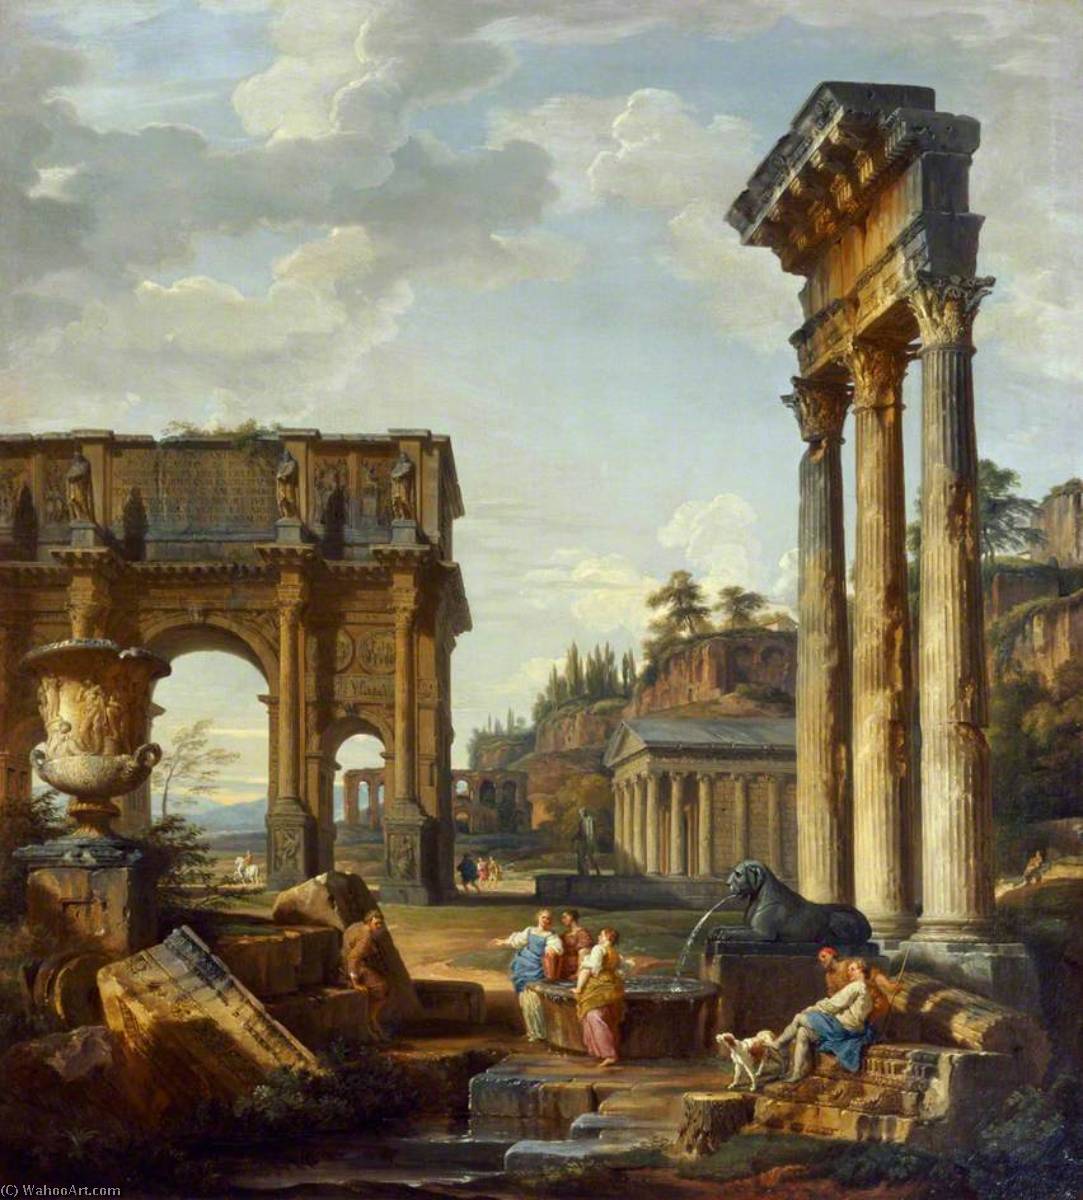 WikiOO.org - 백과 사전 - 회화, 삽화 Giovanni Paolo Pannini - Landscape with the Arch of Constantine